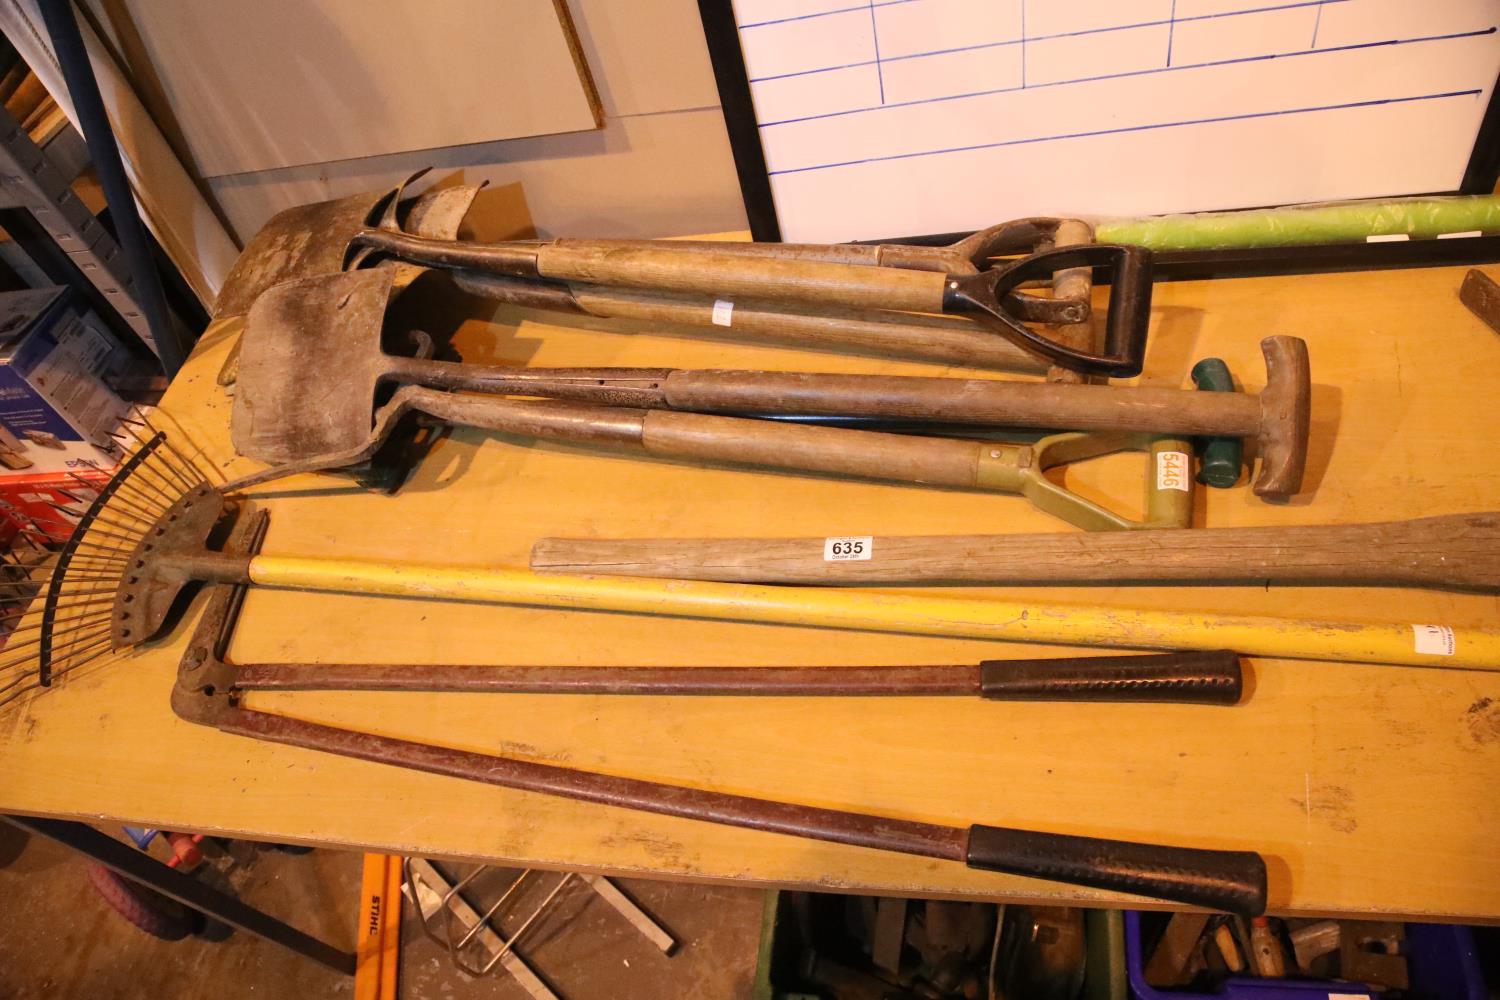 Selection of garden tools including spades, forks, rakes etc. Not available for in-house P&P